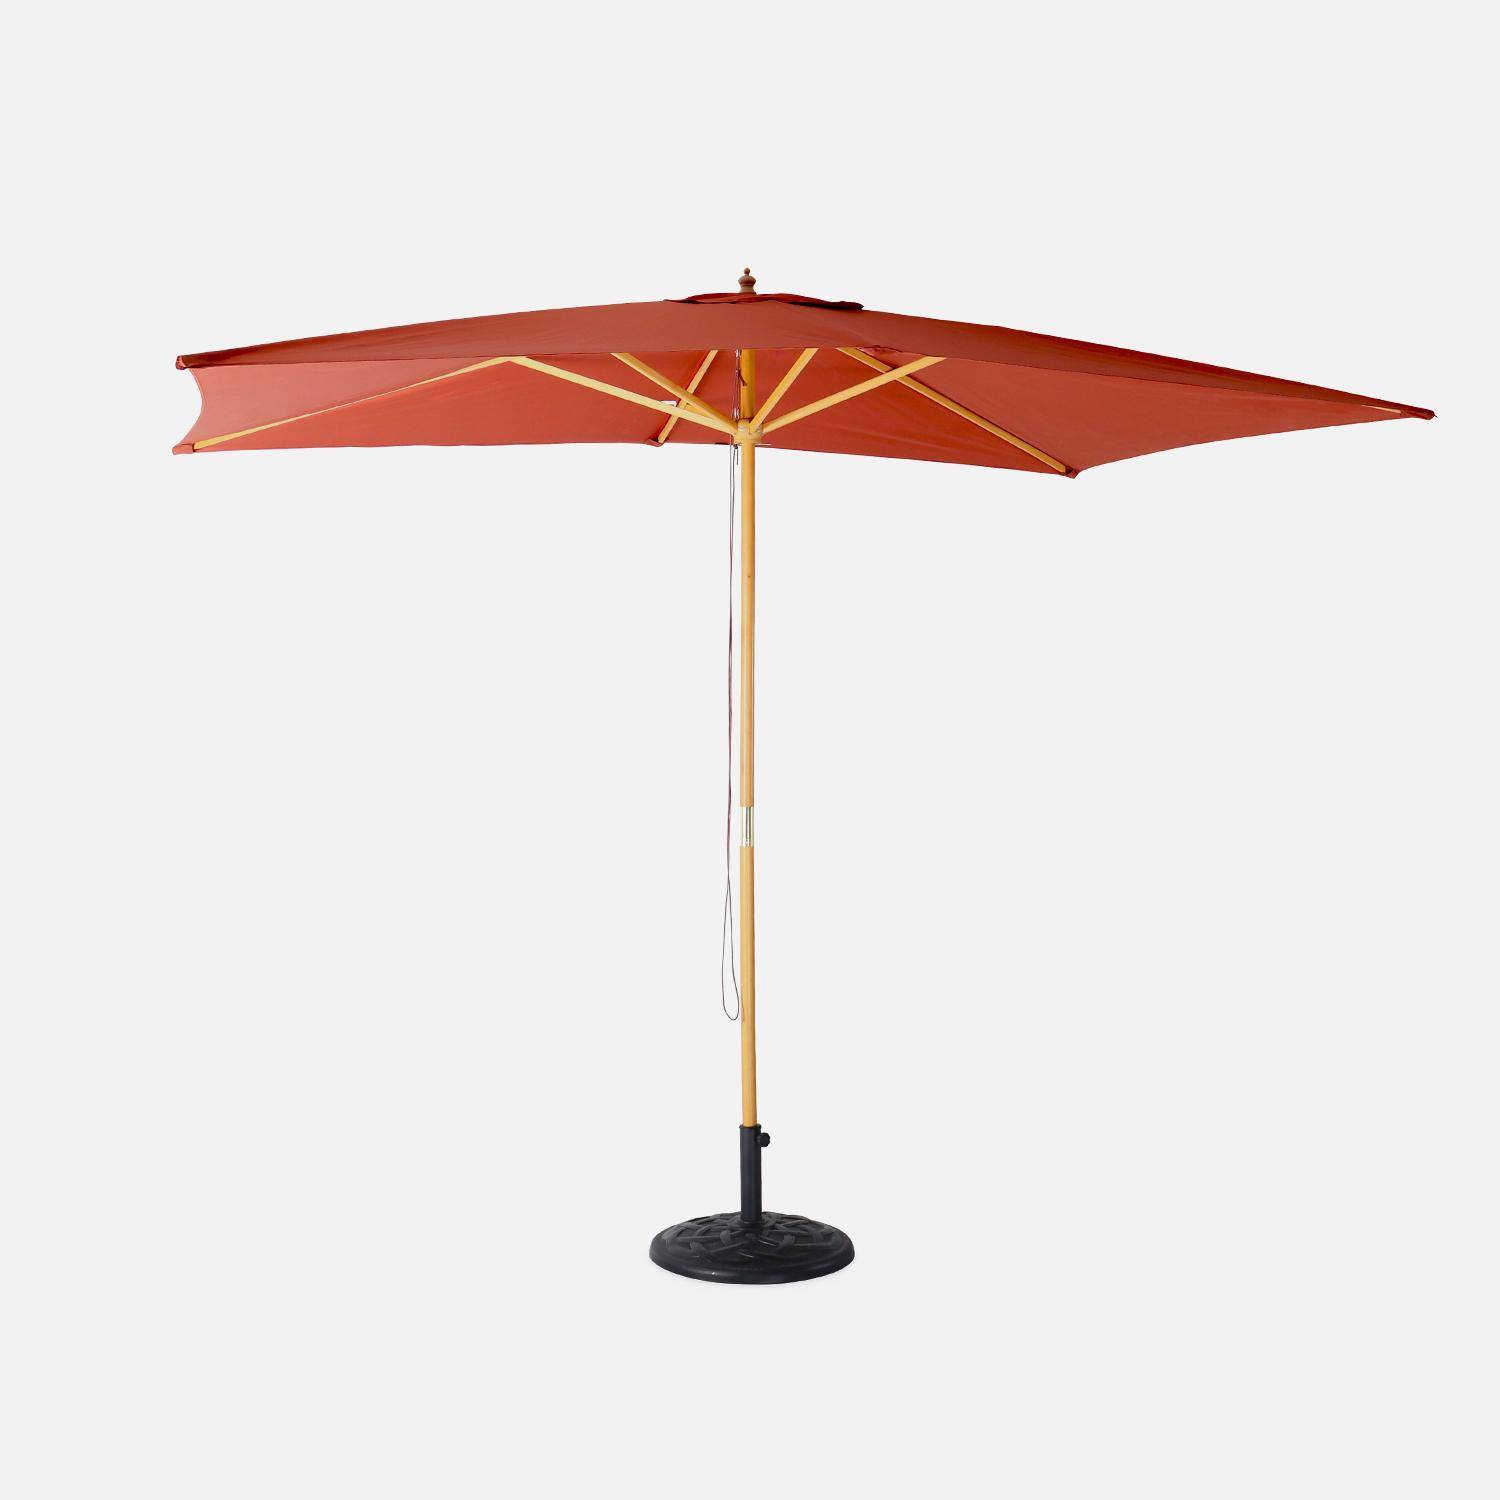 Straight rectangular wooden parasol 2x3m - adjustable central mast in wood and hand pulley opening - Cabourg - Terracotta,sweeek,Photo1